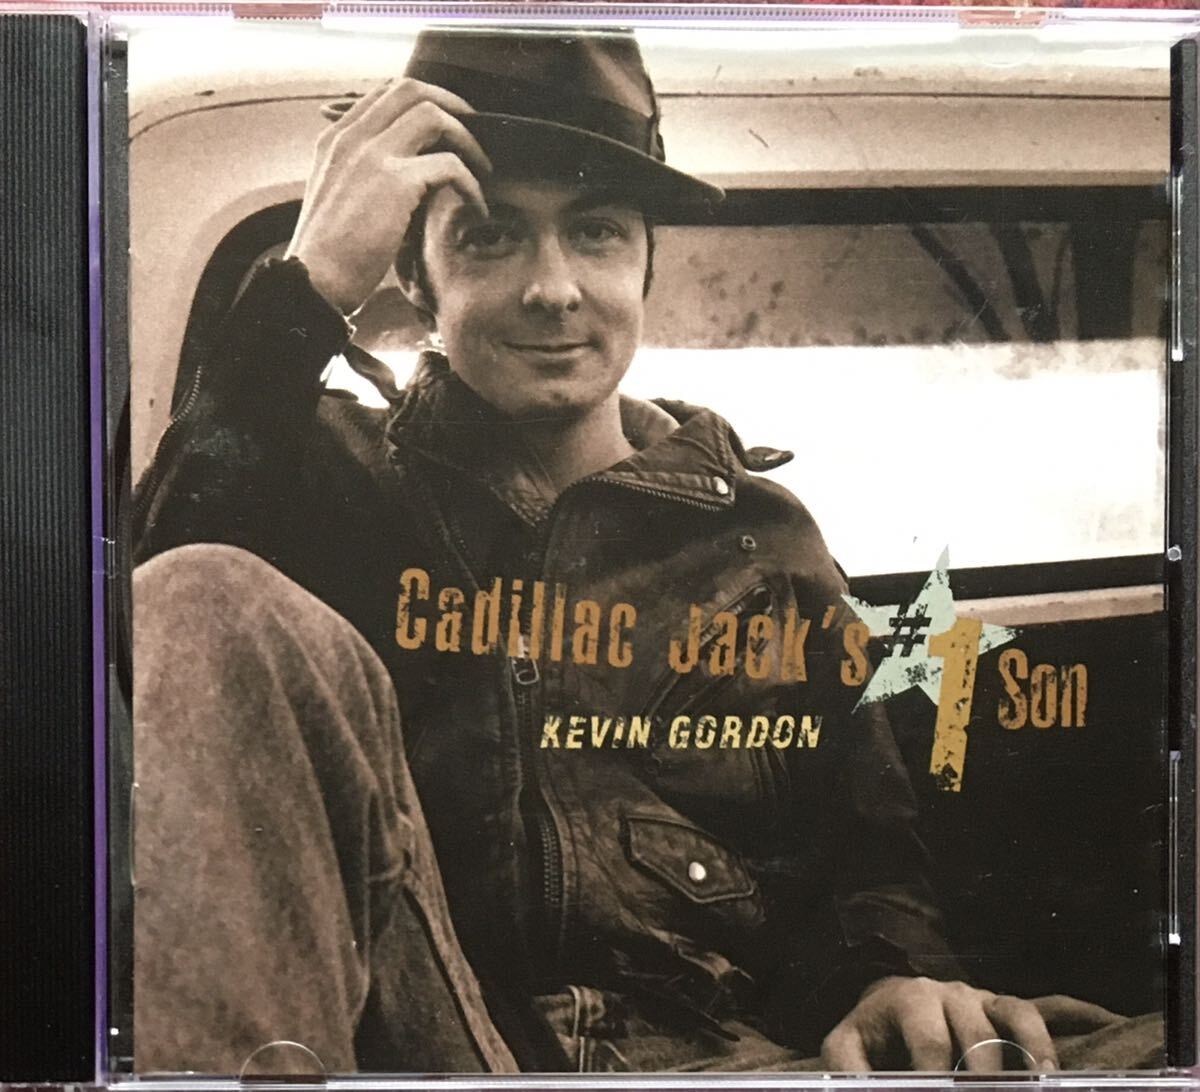 Kevin Gordon/Garry Tallent(Bruce Springsteen and the E Street Ban)プロデュース98年傑作！/ルーツロック/カントリーロック/スワンプ_画像1